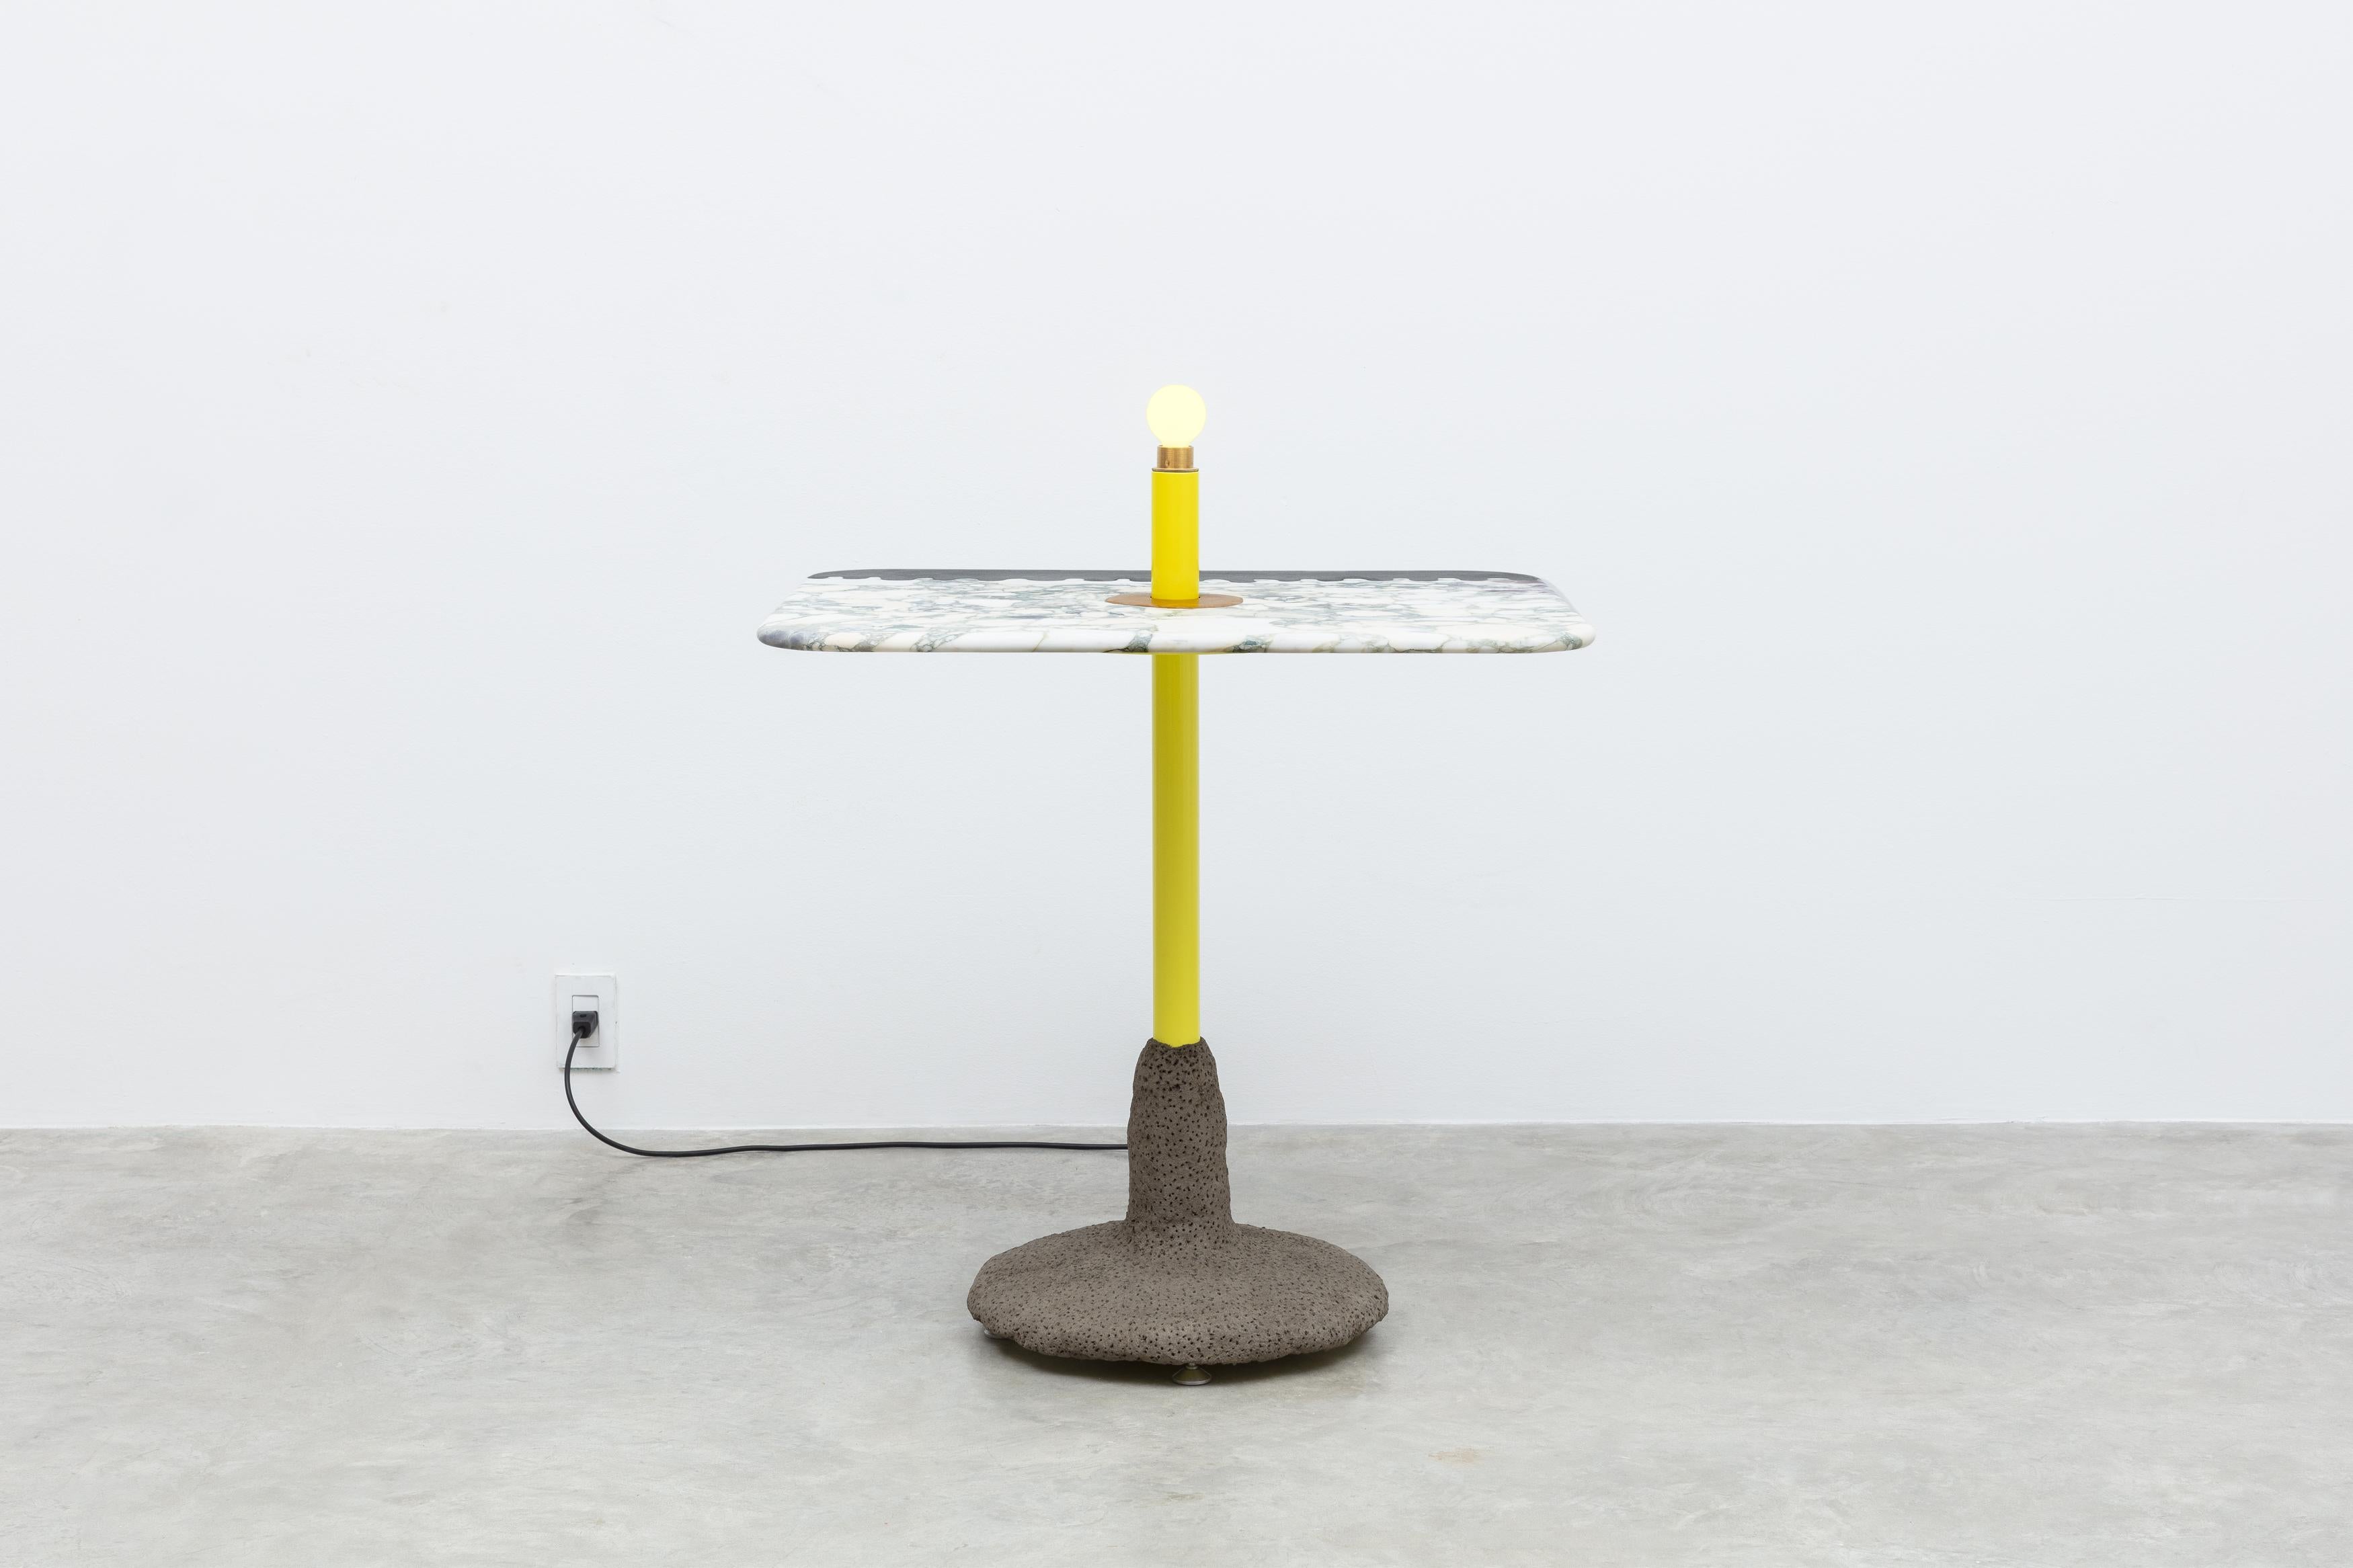 Jonathan Trayte [British, b. 1980]
Wawa Island, 2018
Marble, granite, powder-coated steel, stainless steel, concrete, light fitting
38 x 31.5 x 27.5 inches
97 x 80 x 70 cm

Jonathan Trayte was born in 1980 in Huddersfield, UK. Trayte received